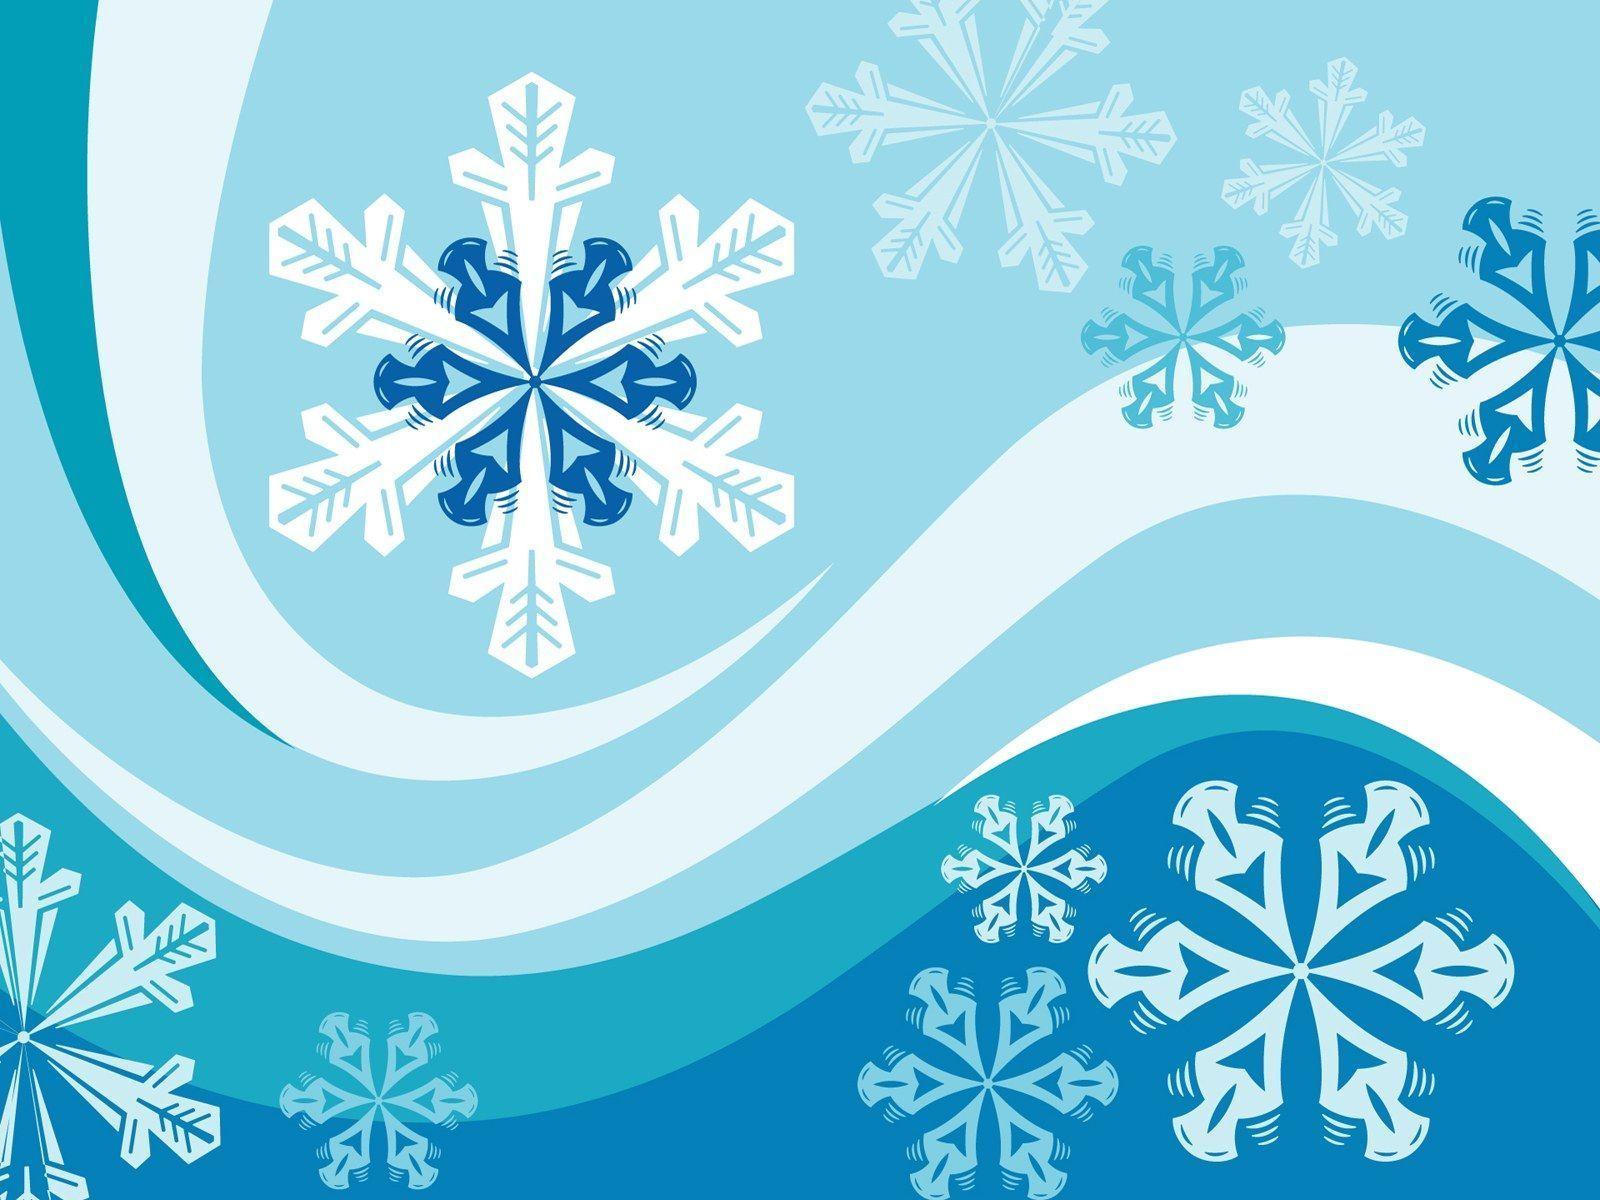 HD Abstract Winter background snowflakes patterns